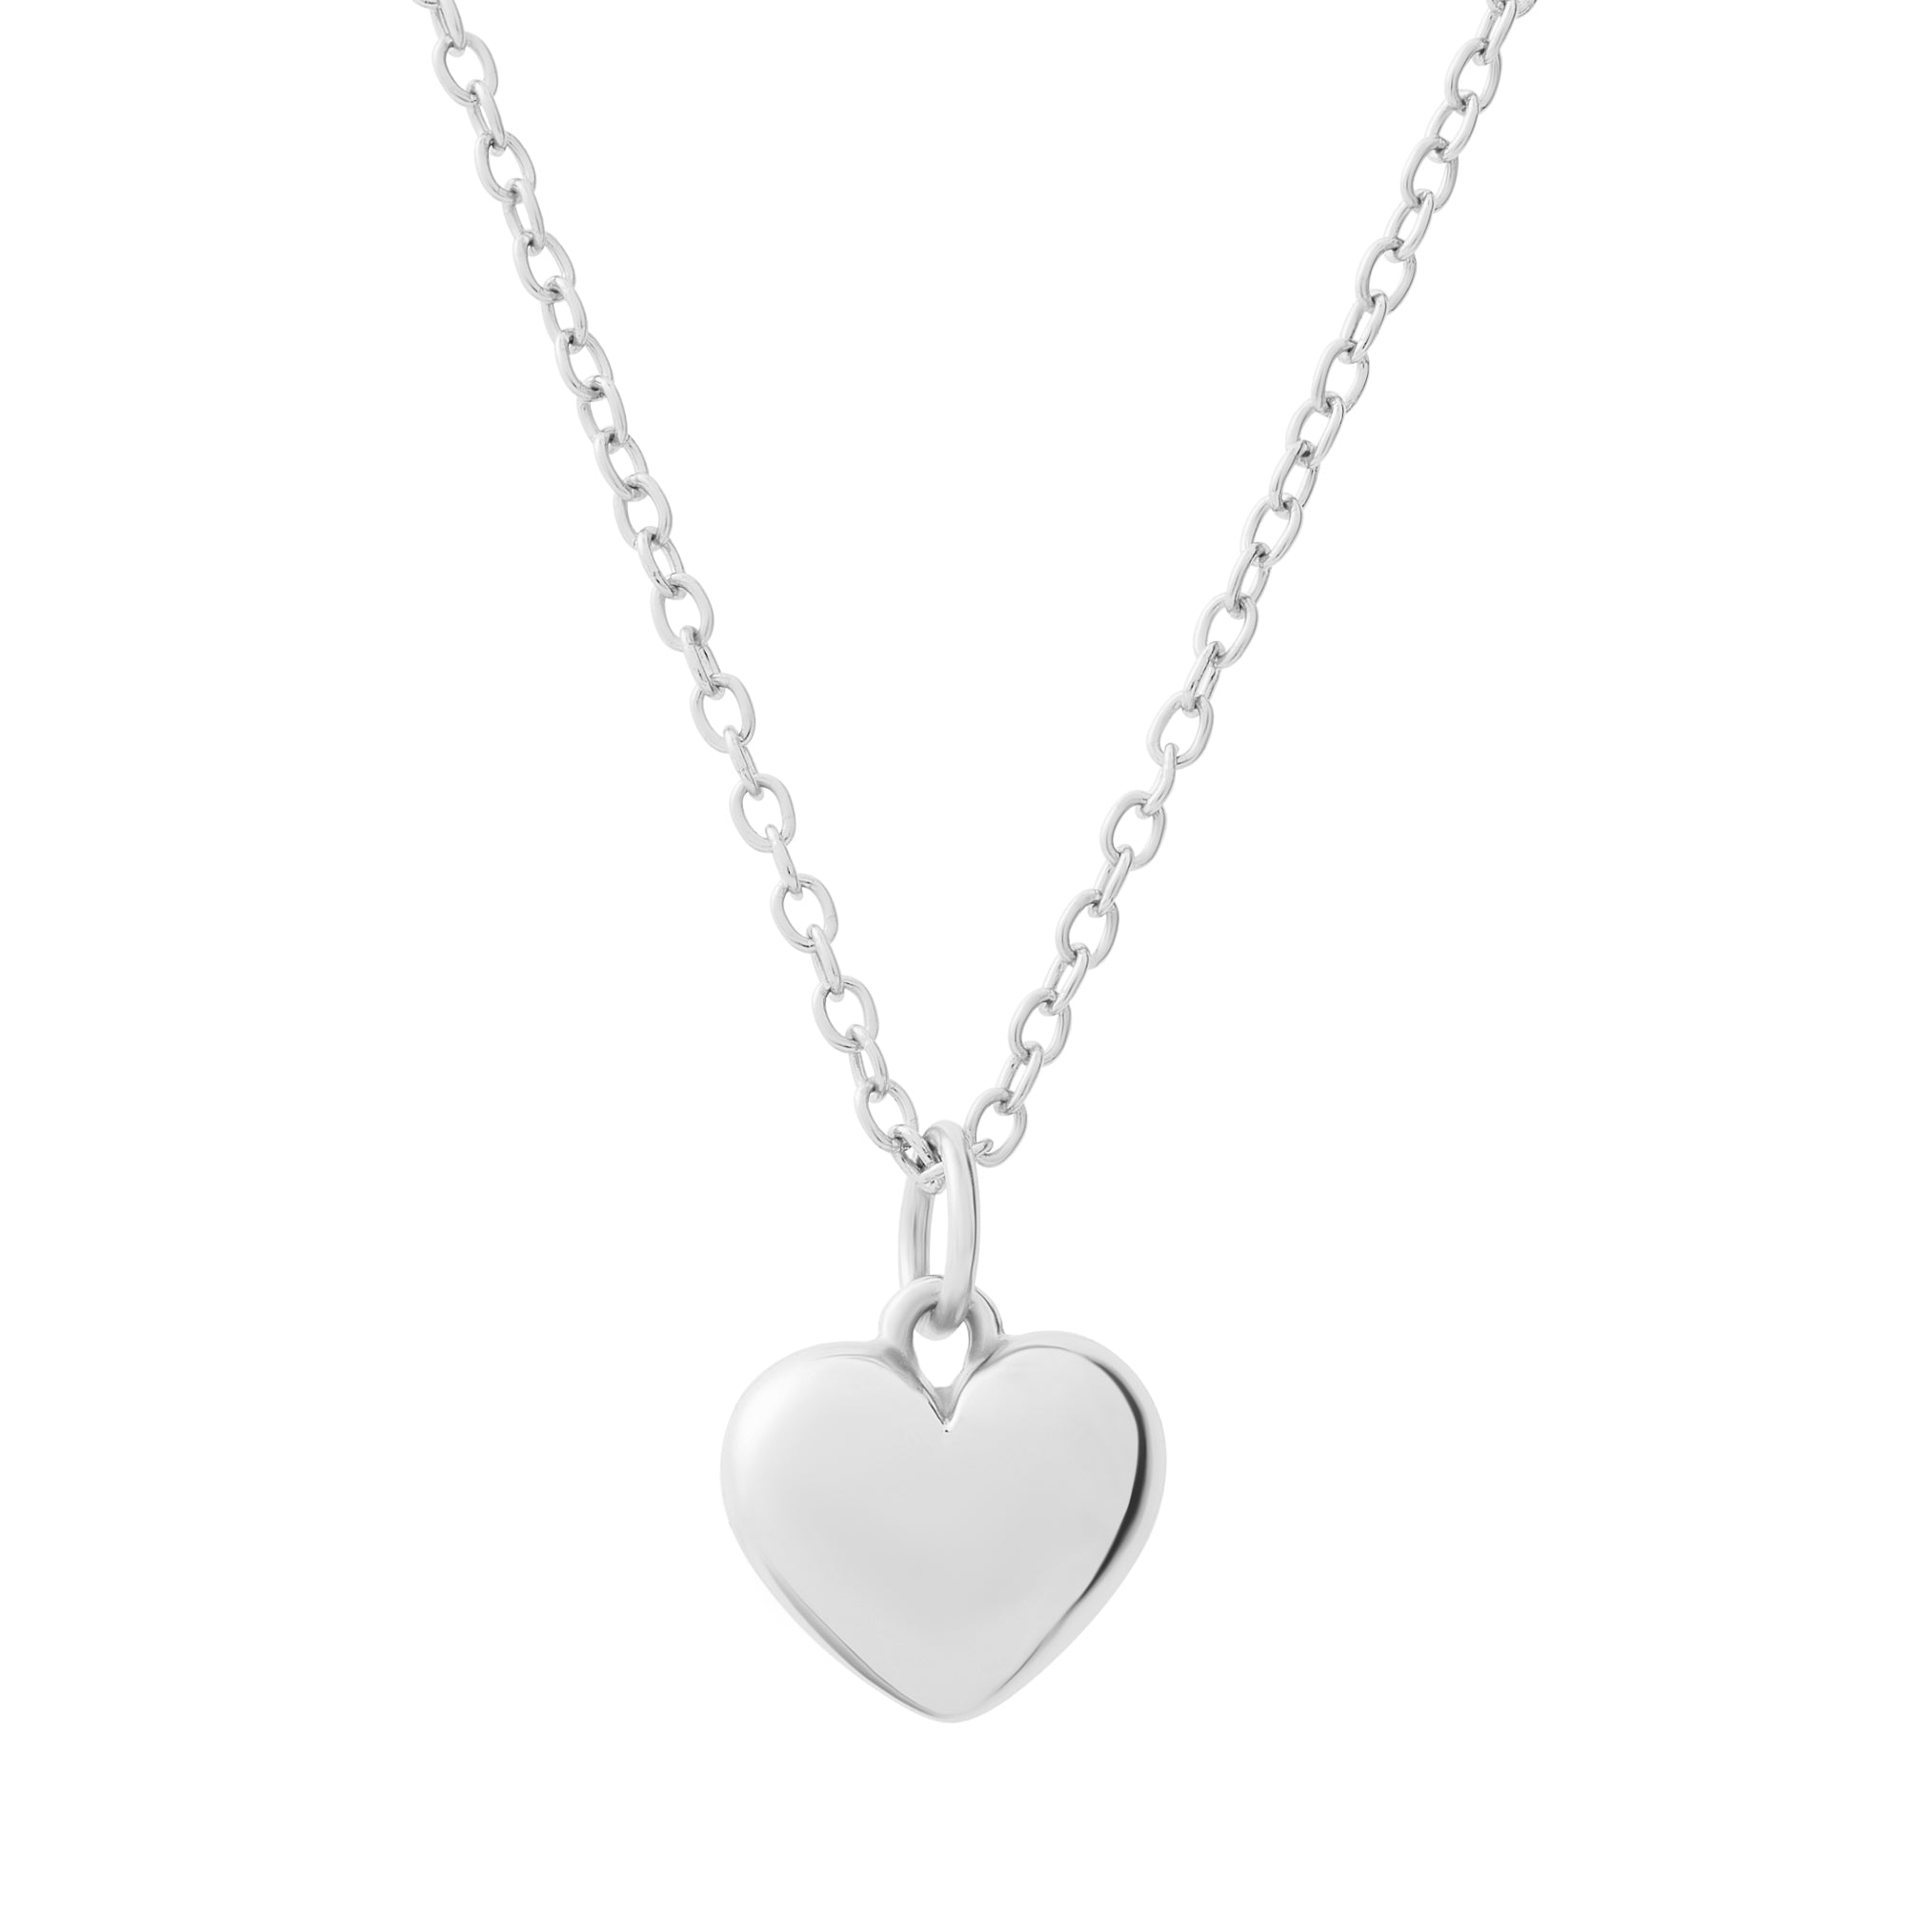 Puffed Heart Necklace - Silver